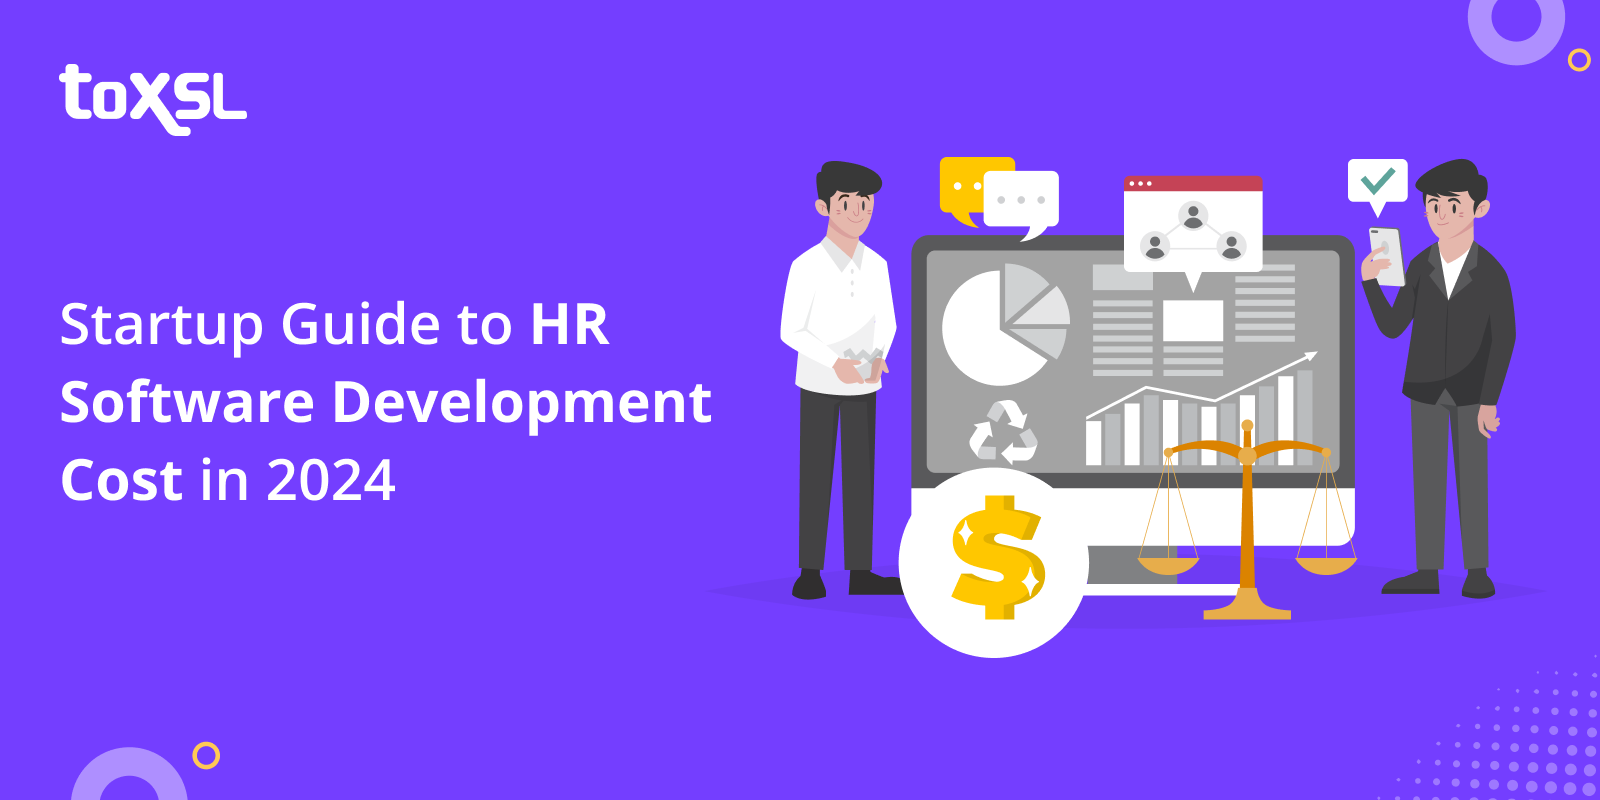 Startup Guide to HR Software Development Cost in 2024